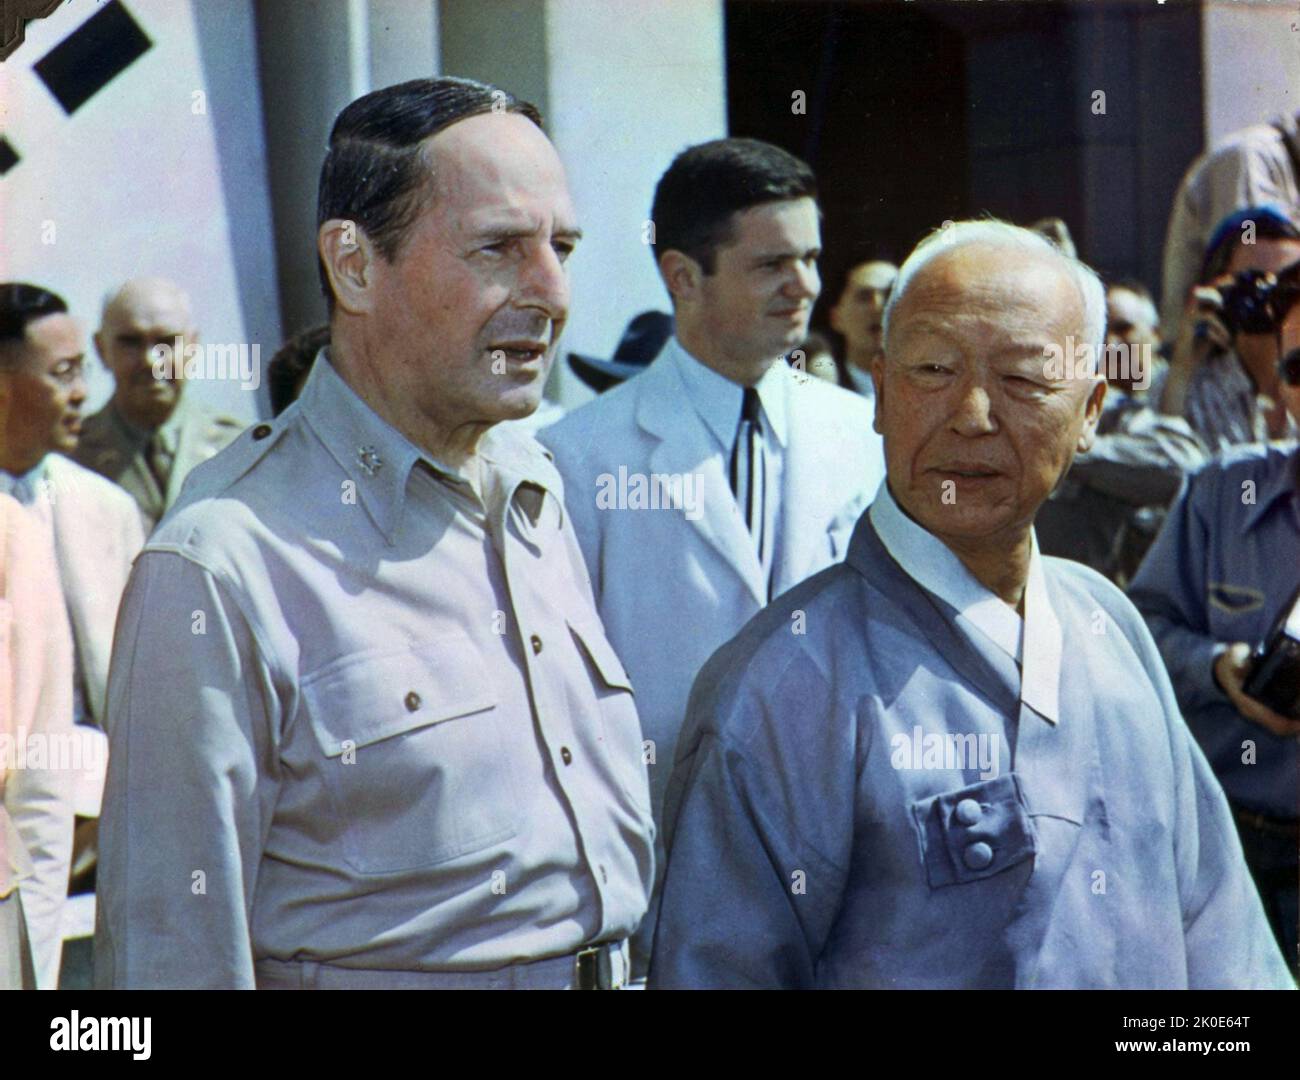 Syngman Rhee and General Douglas MacArthur, 1948. Syngman Rhee (1875 - 1965) South Korean politician who served as the first President of South Korea from 1948 to 1960. Rhee was also the first and last president of the Provisional Government of the Republic of Korea from 1919 to his impeachment in 1925 and from 1947 to 1948. Douglas MacArthur (26 January 1880 - 5 April 1964) was an American military leader who served as General of the Army for the United States, as well as a Field Marshal to the Philippine Army. Stock Photo